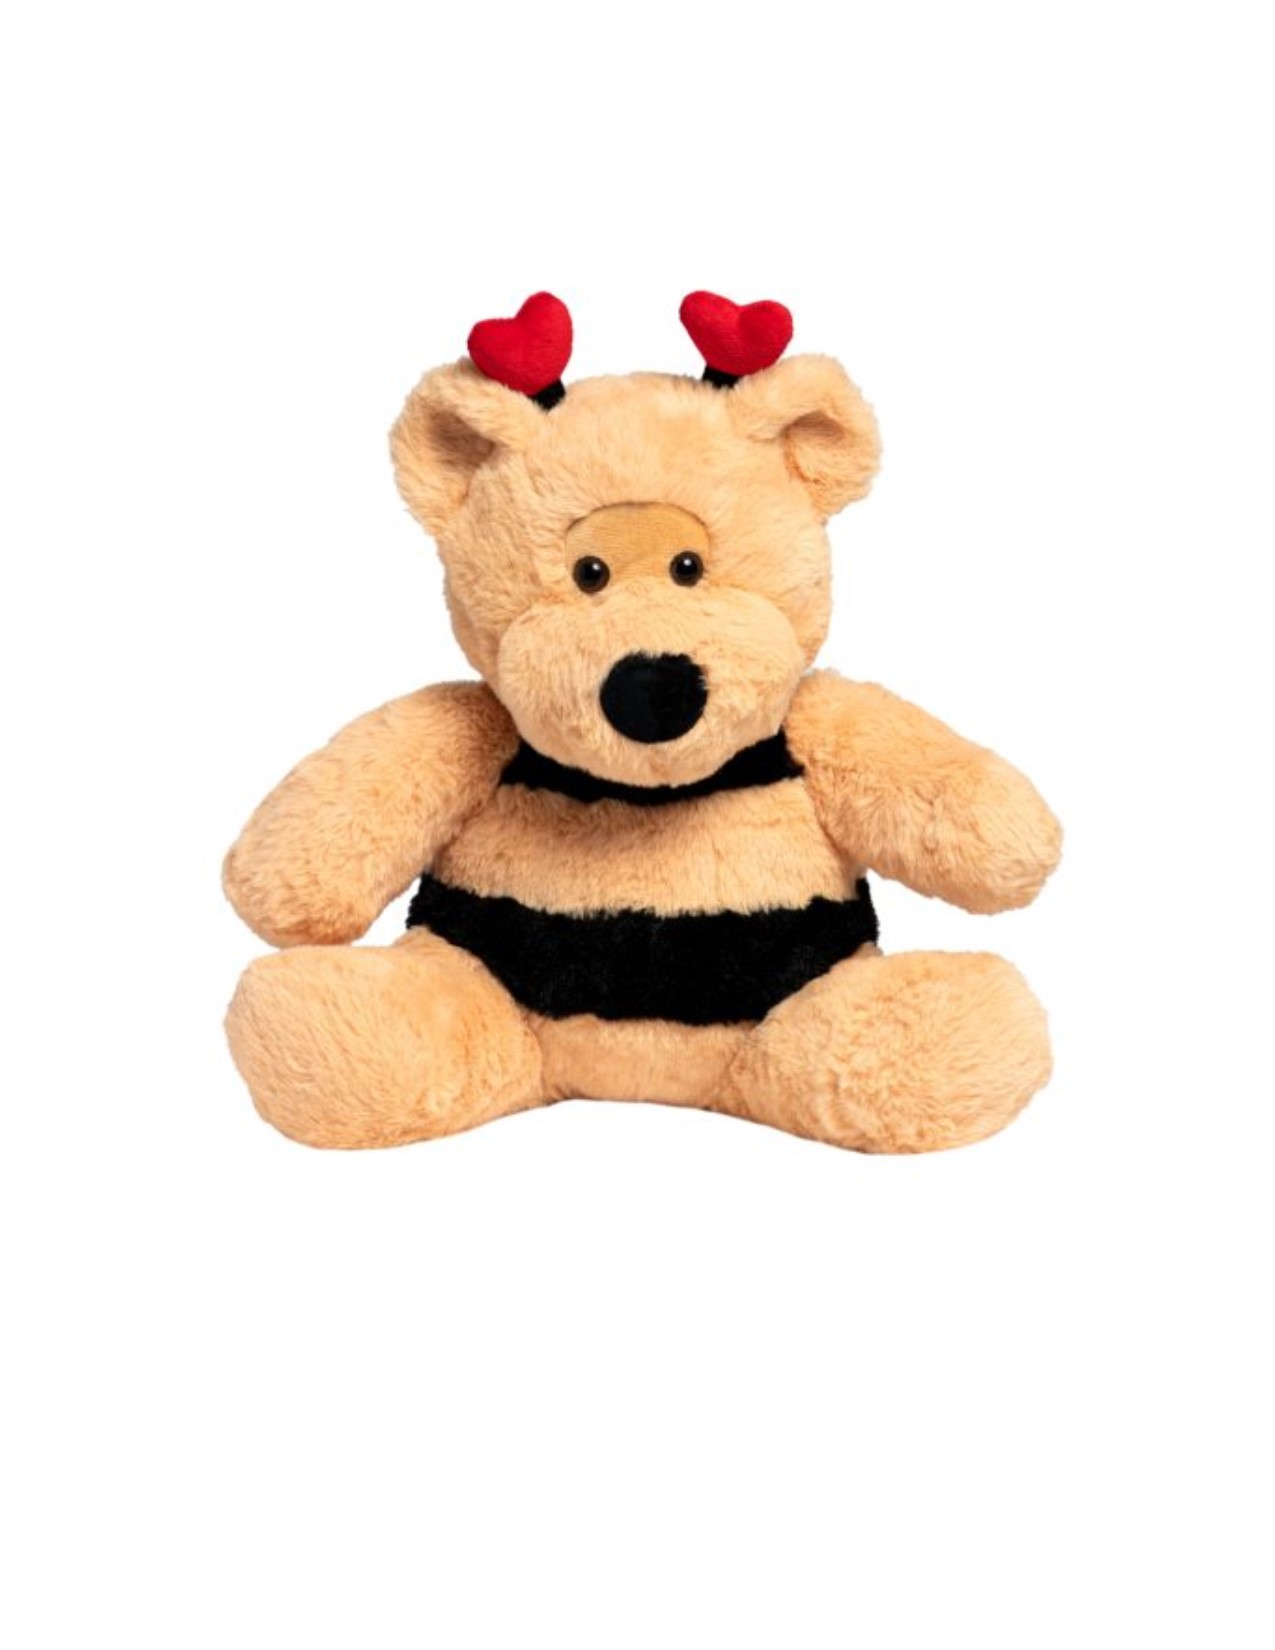 brown teddy bear with black stripes and red hearts on heads